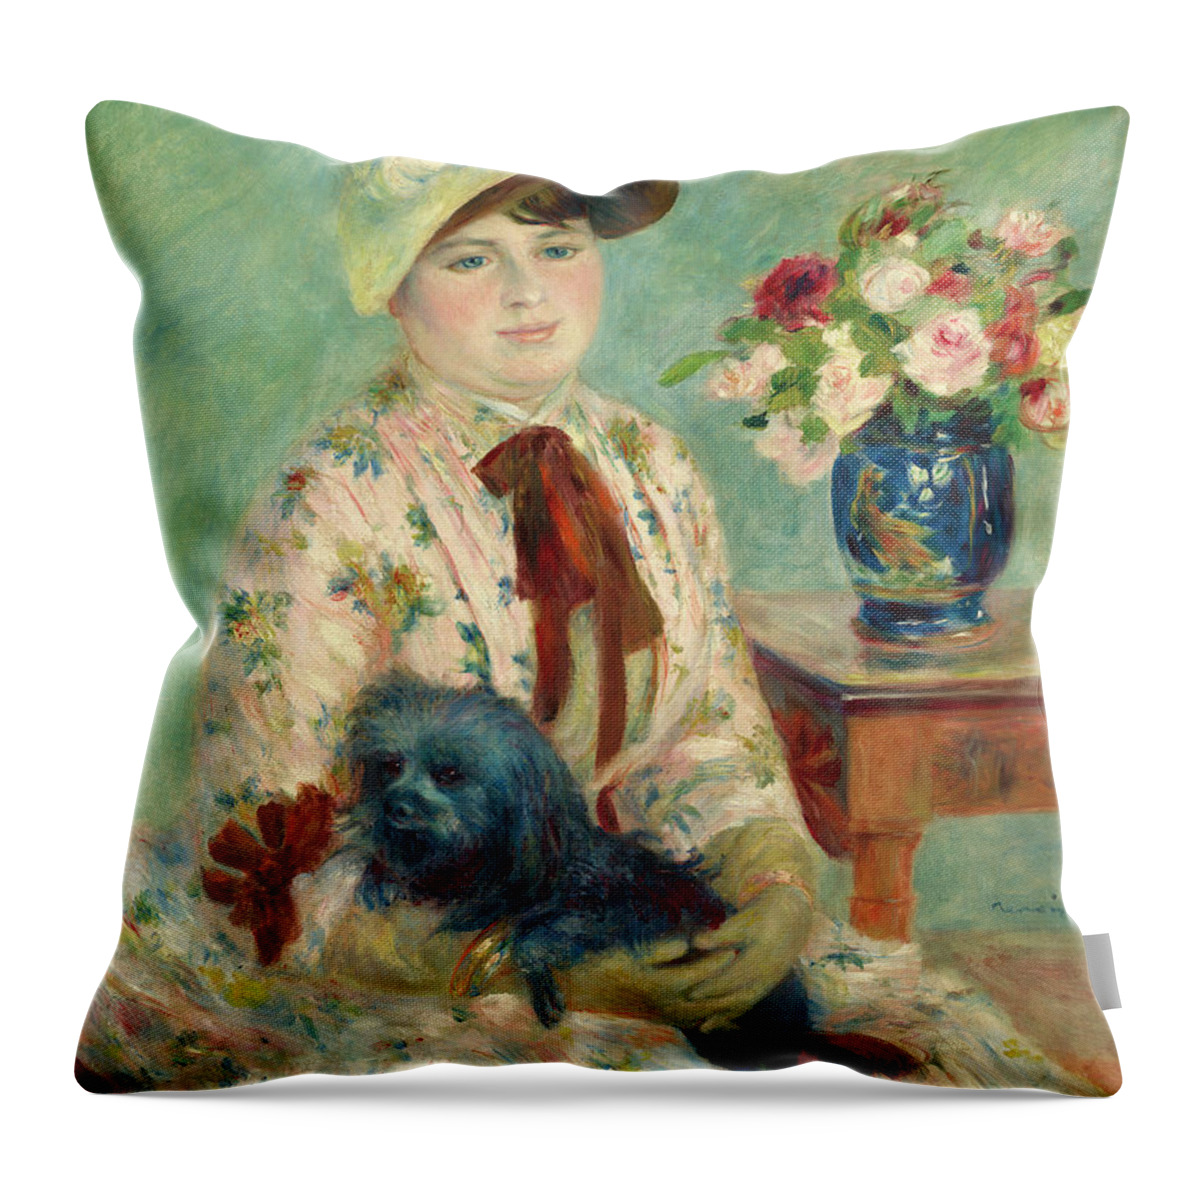 Renoir Throw Pillow featuring the painting Mademoiselle Charlotte Berthier, 1883 by Pierre Auguste Renoir